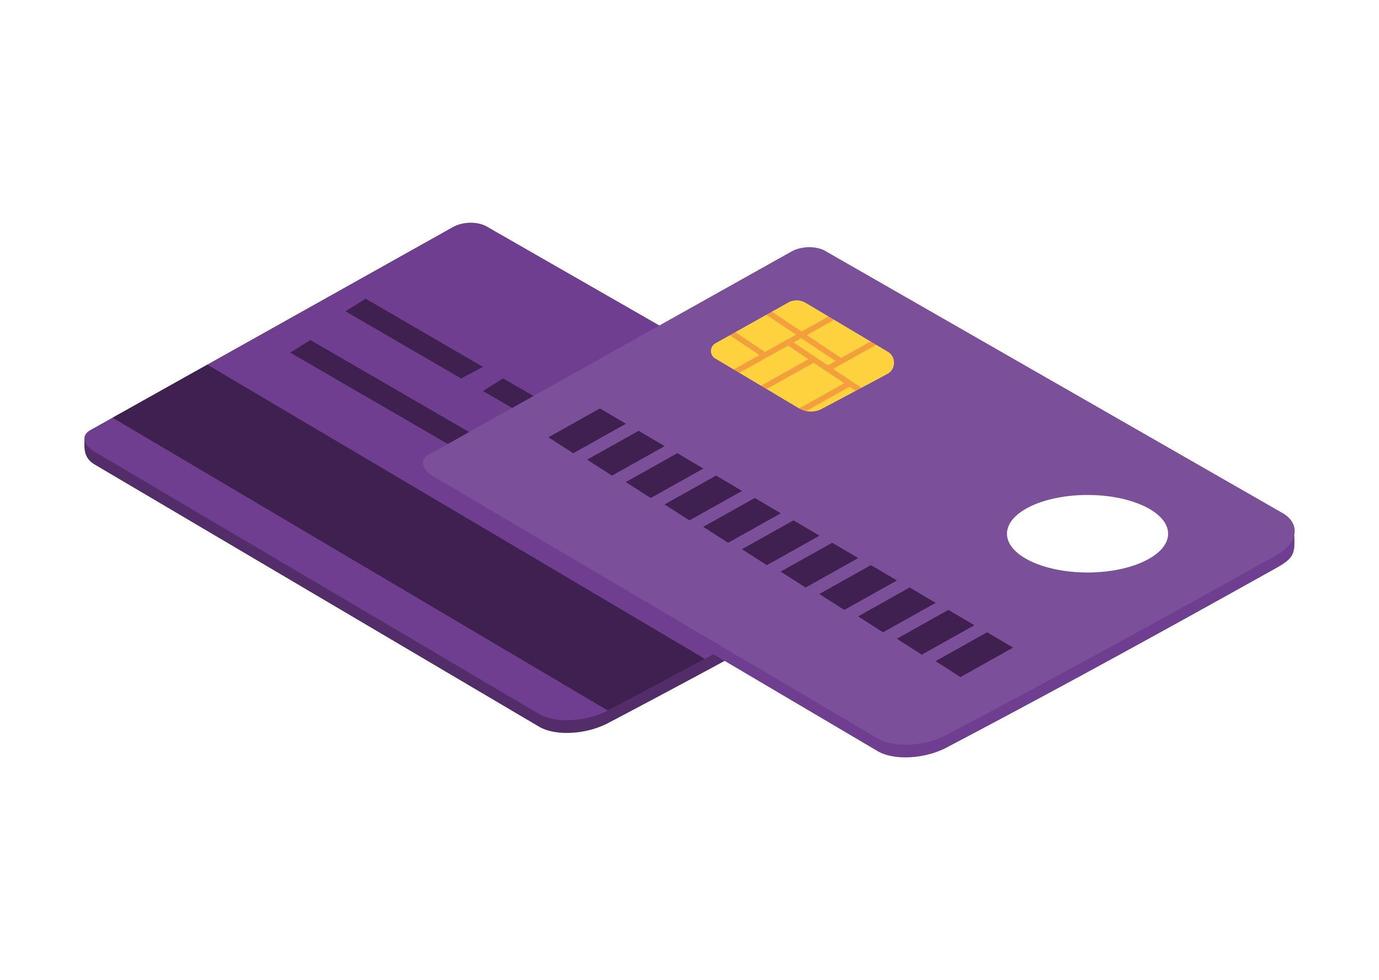 credit cards isometric vector